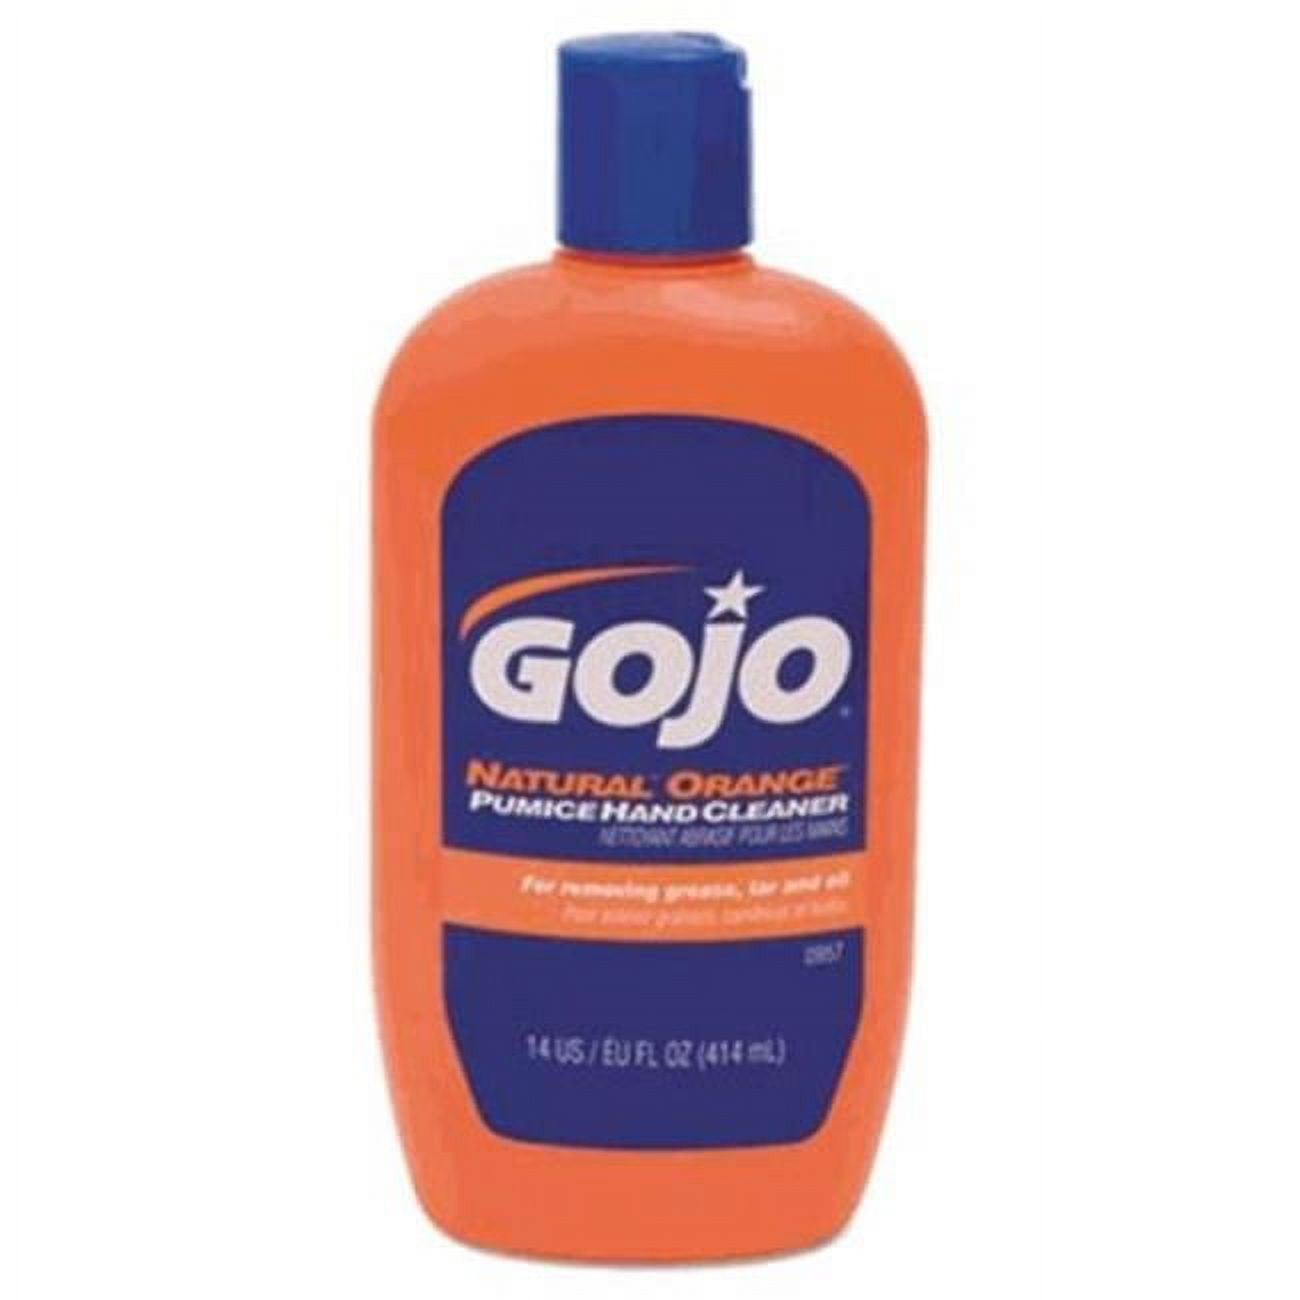 Go-jo 880300 Natural Pumice Hand Cleaner, 14 Oz.